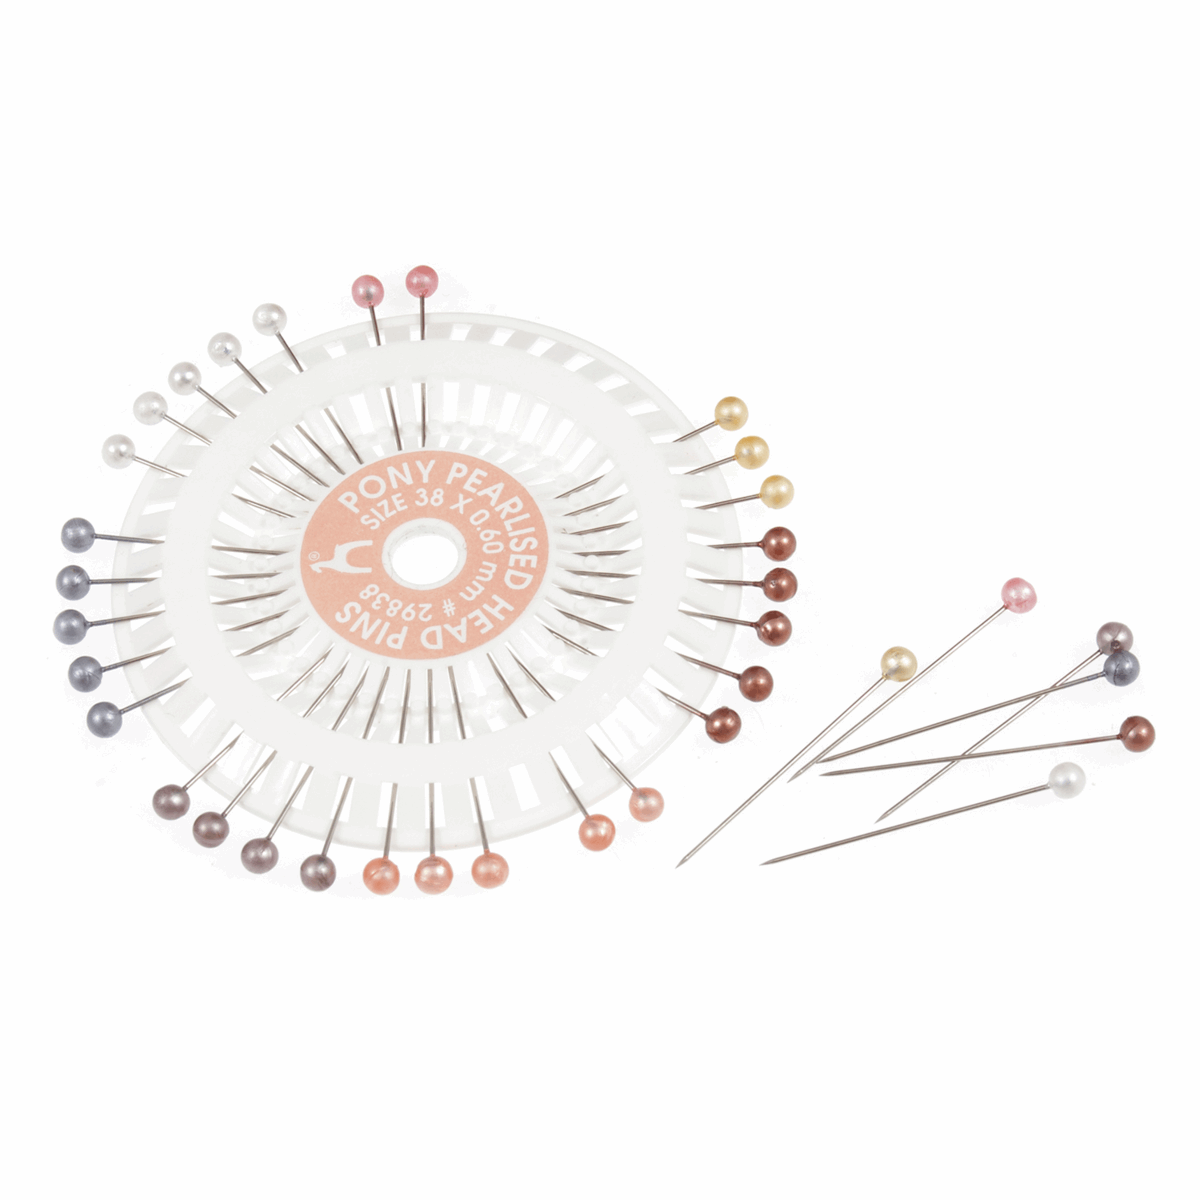 PONY Rosette of Metalic Pearlised Head Pins - Assorted Colours